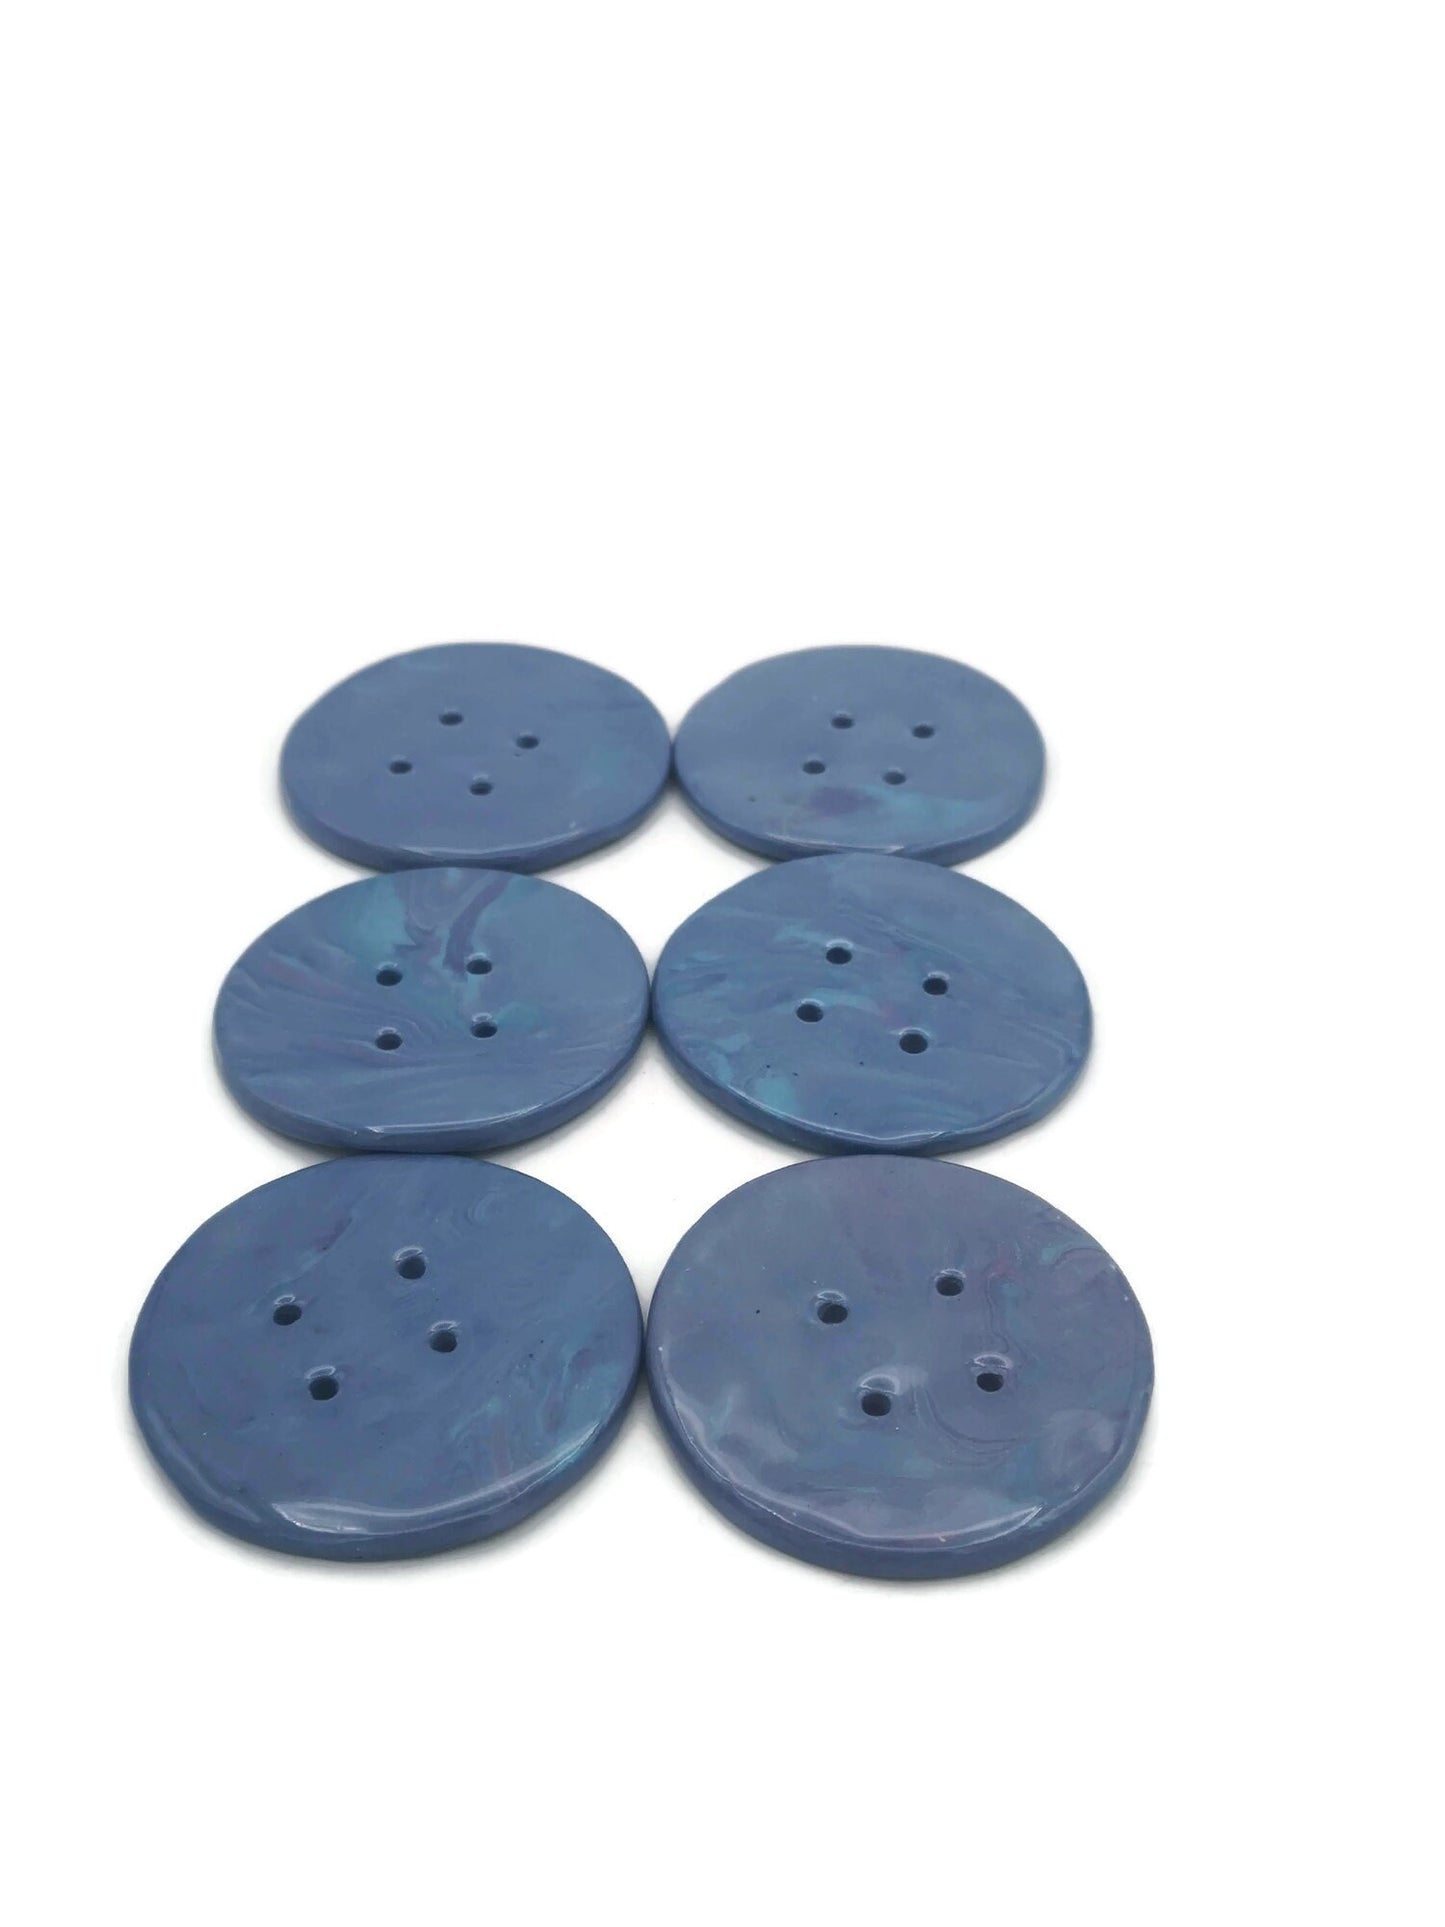 6Pc Extra Large Sewing Buttons 60mm, Mable Blue And Purple 4 Hole Handmade Ceramic Round Button, Artisan Novelty Coat Button Lot For Clothes - Ceramica Ana Rafael